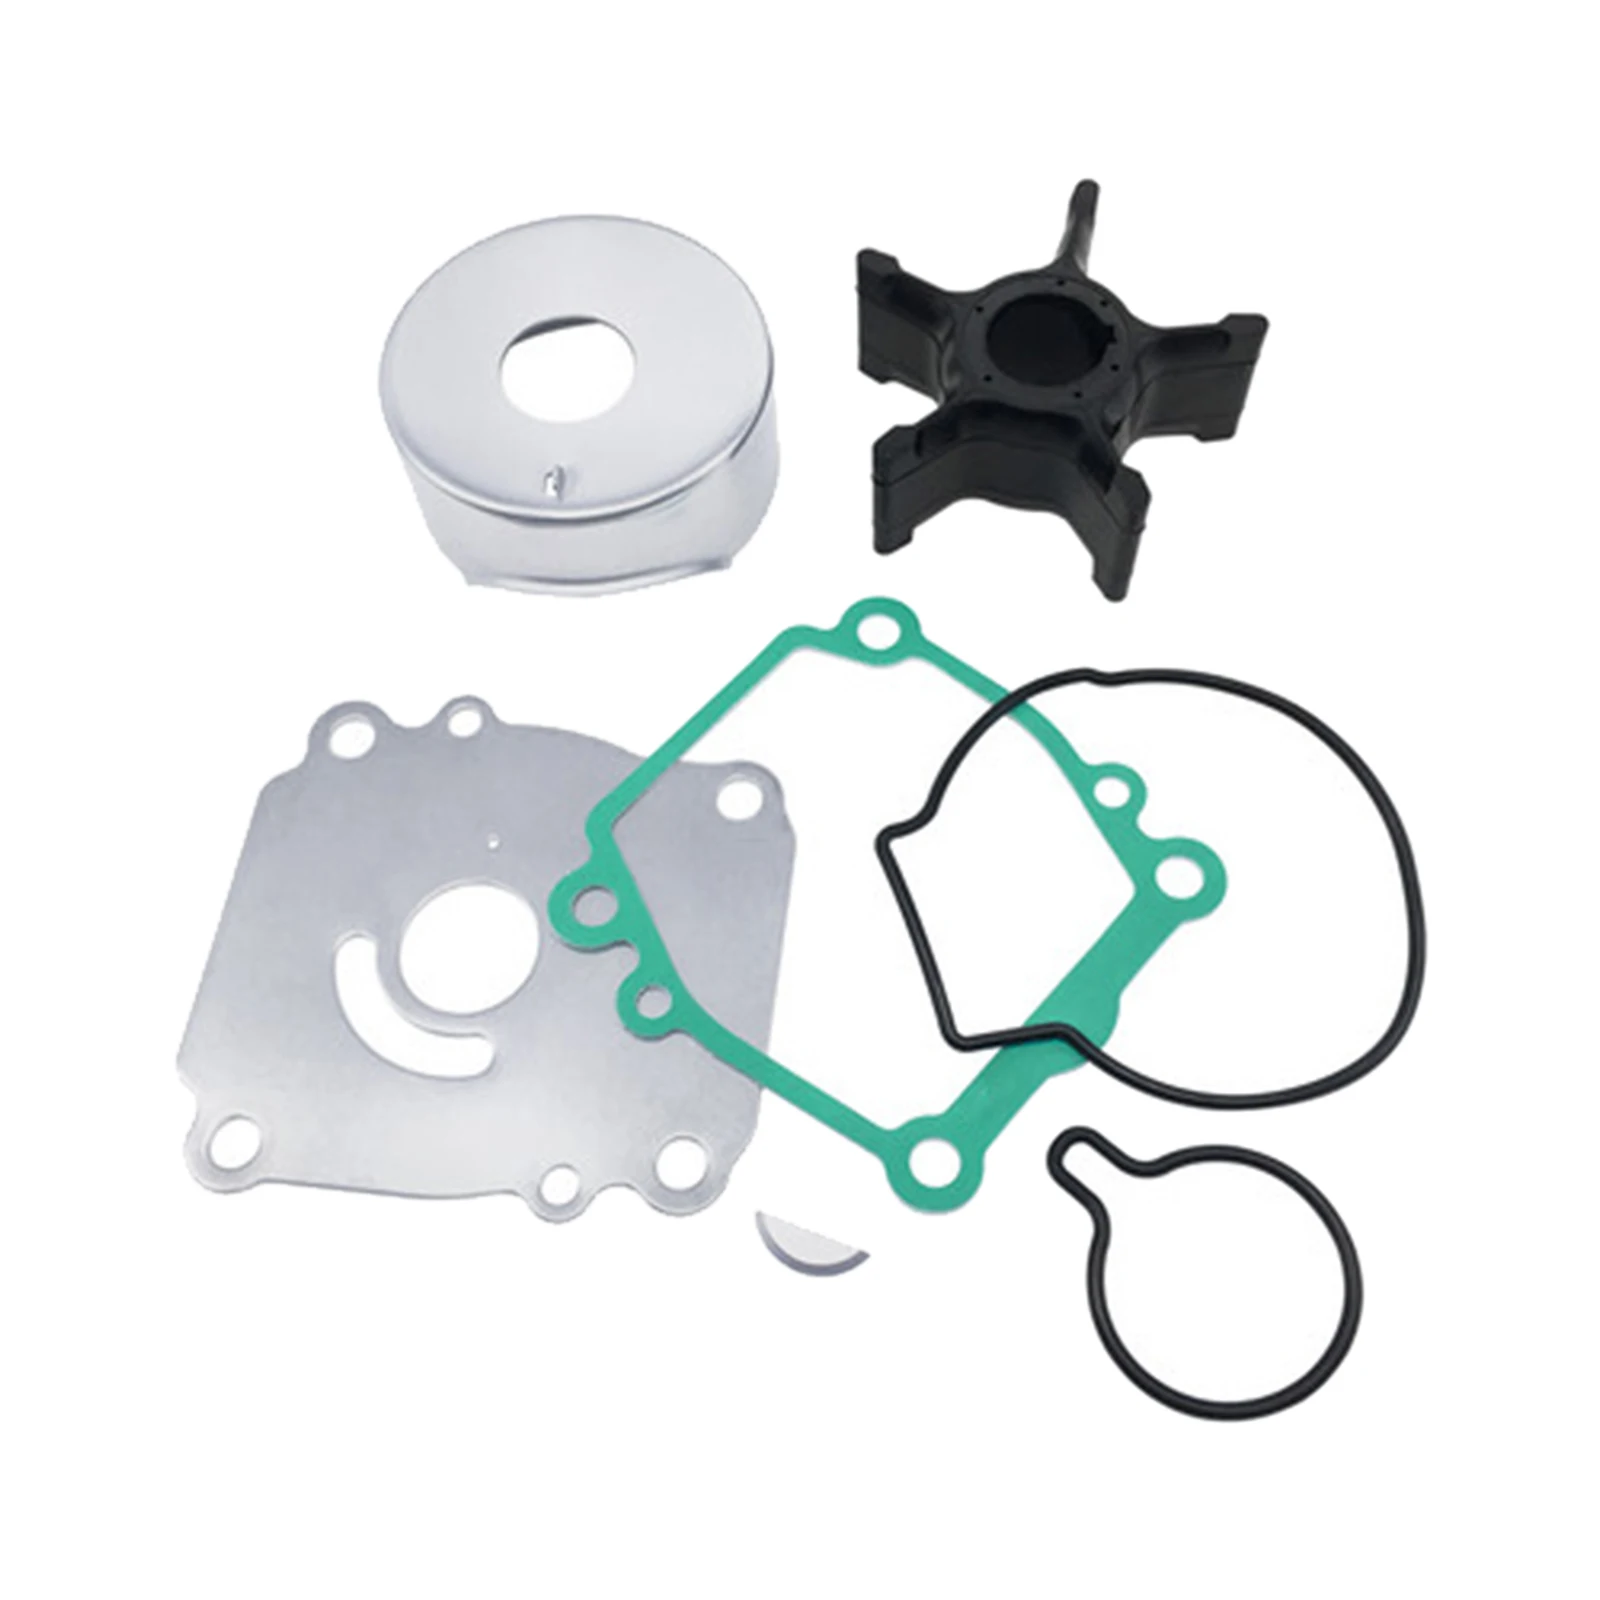 Water Pump Impeller Service Kit 17400-92J00 fits for Suzuki Outboards, Boat Motor Spare Parts High Reliability